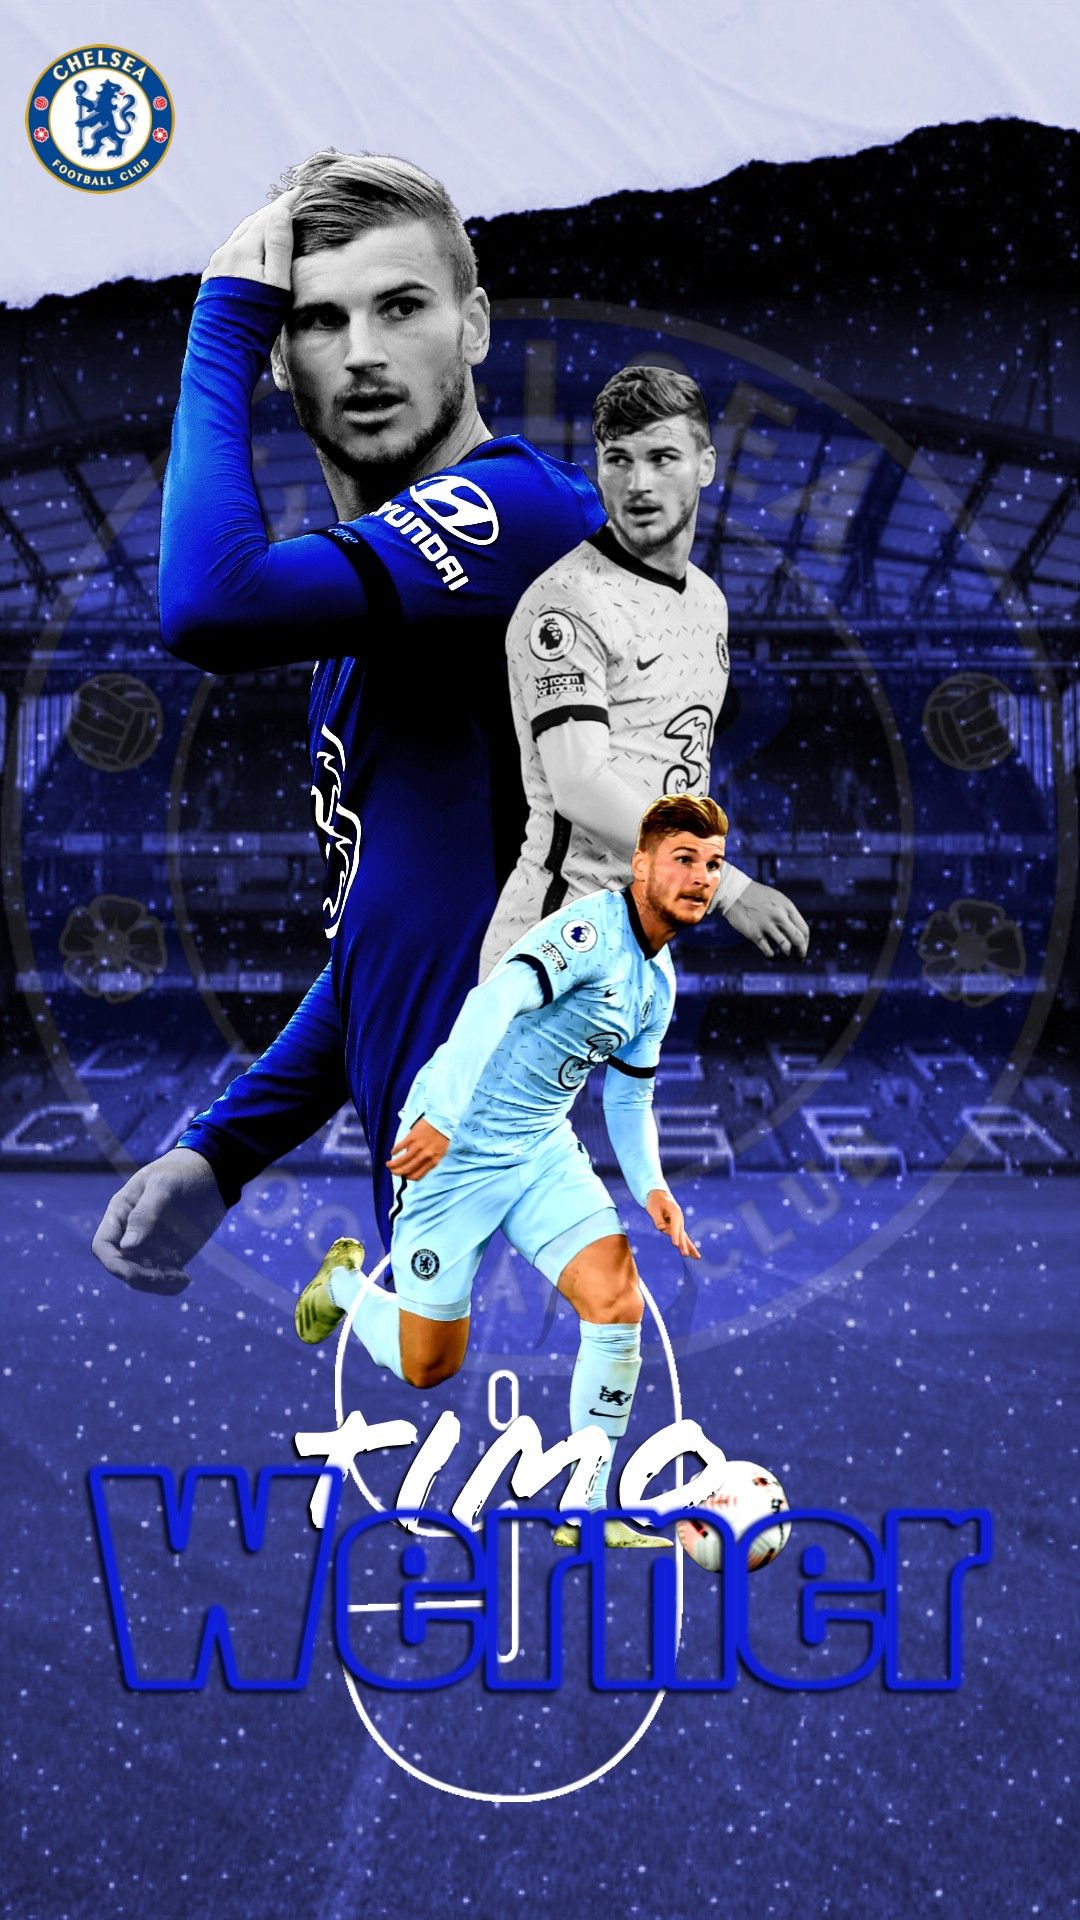 Timo Werner Art Mobile. Chelsea football club wallpaper, Chelsea football, Chelsea champions league